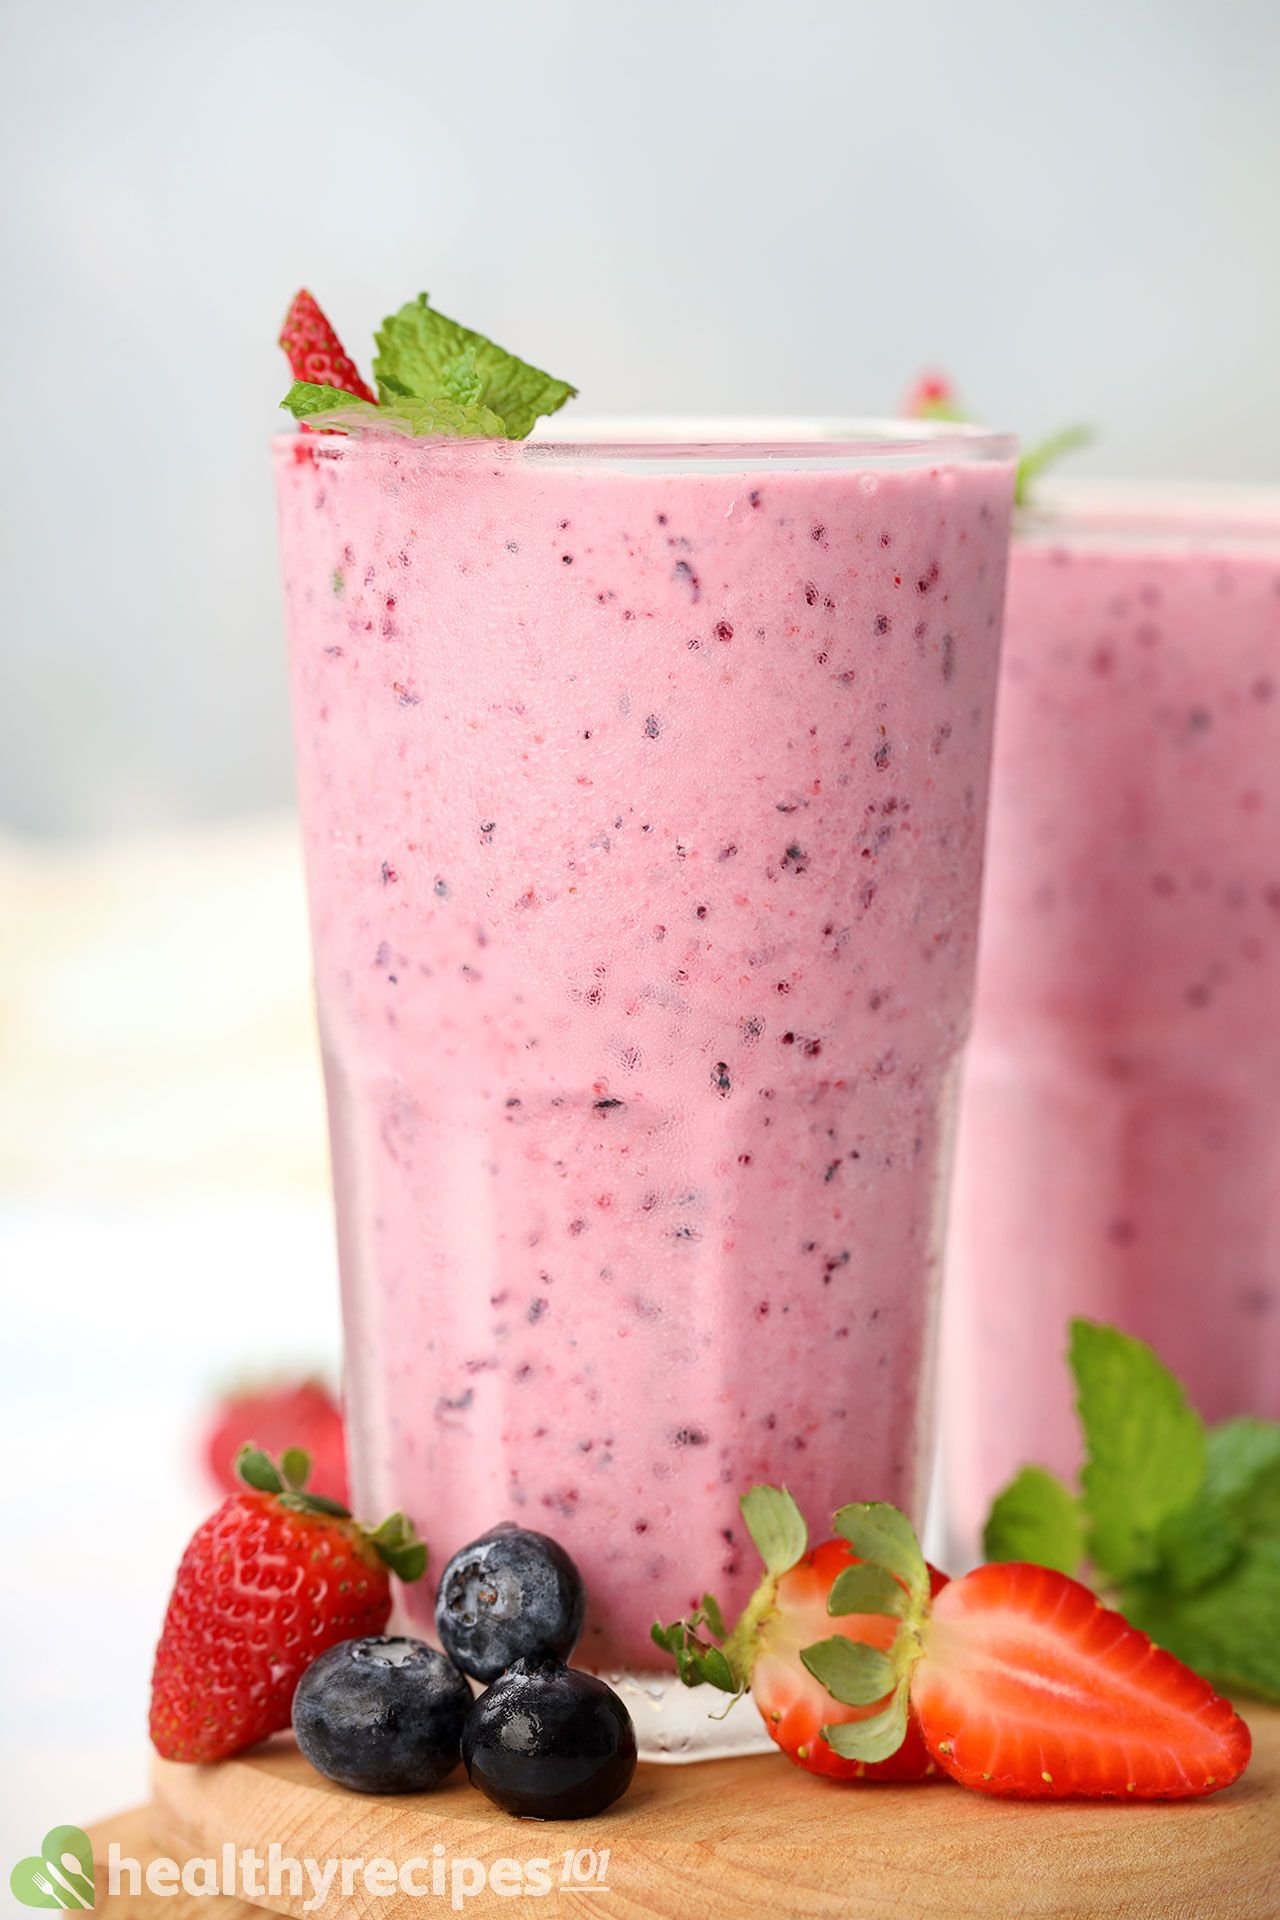 Is This Strawberry Blueberry Smoothie Recipe Healthy